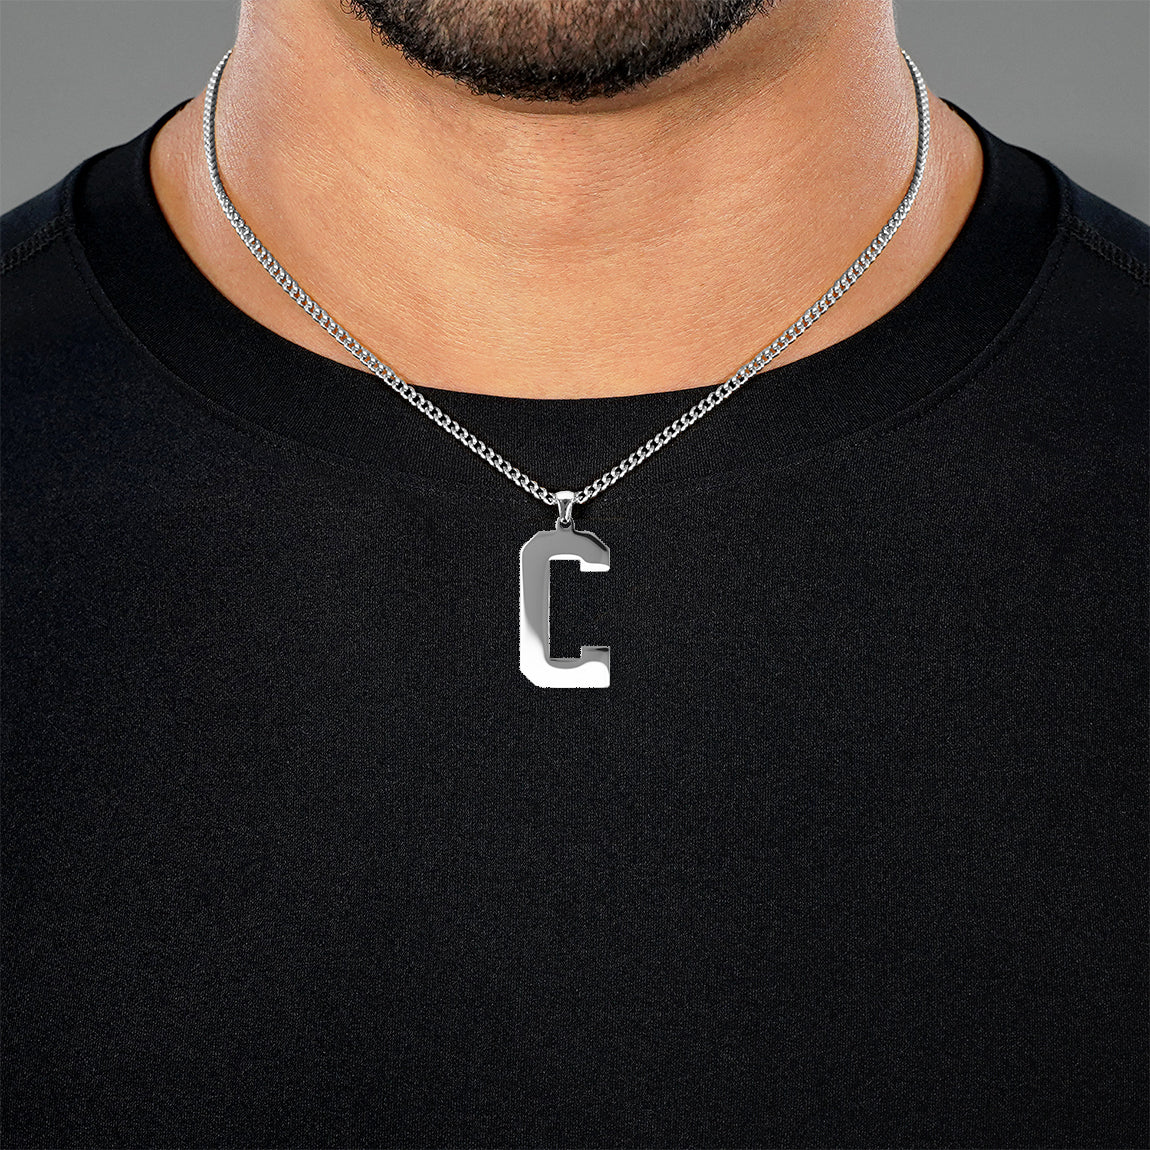 C Letter Pendant with Chain Necklace - Stainless Steel